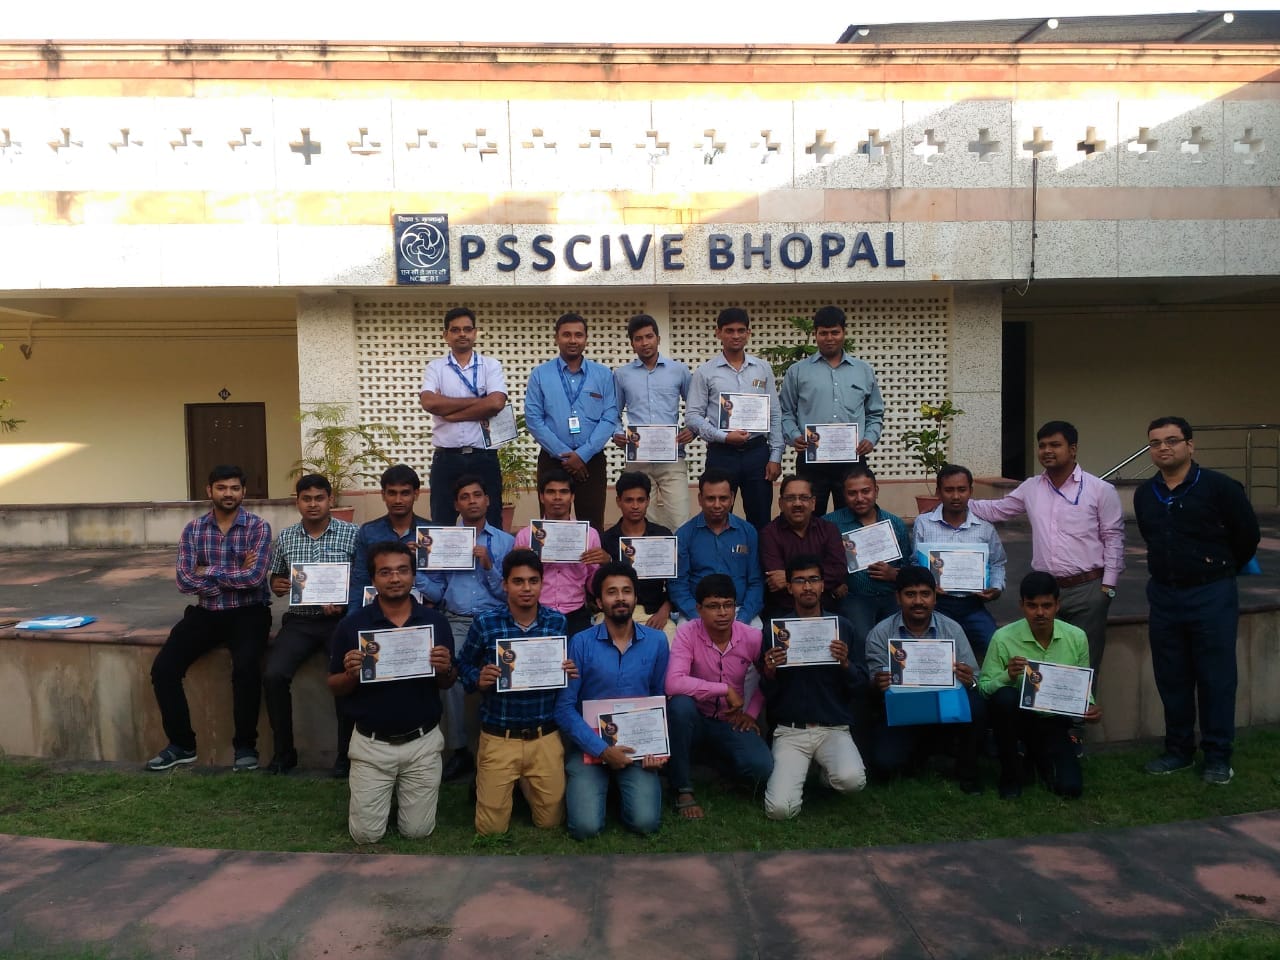 Group photo after getting certificates from PSSCIVE